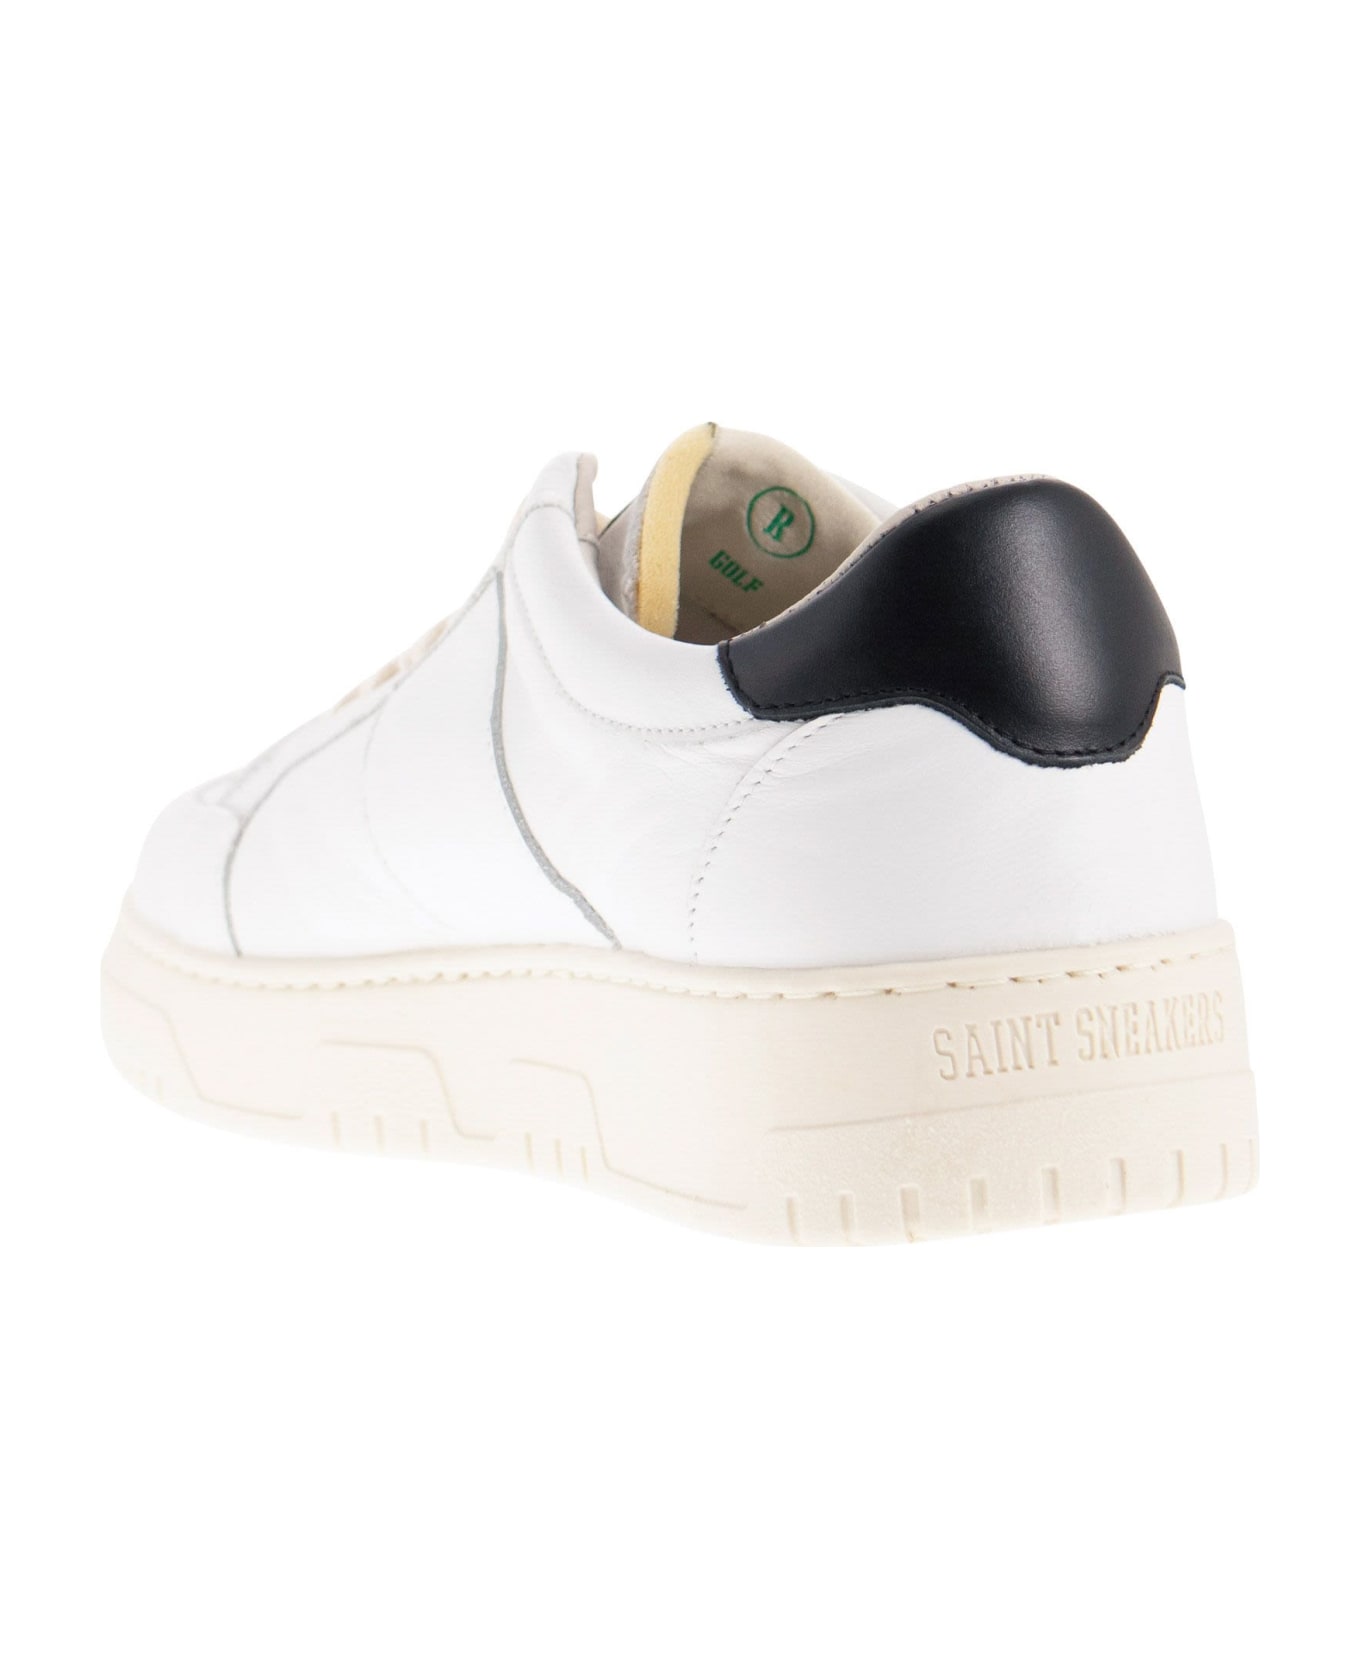 Saint Sneakers Golf - Black And White Trainers - White/black